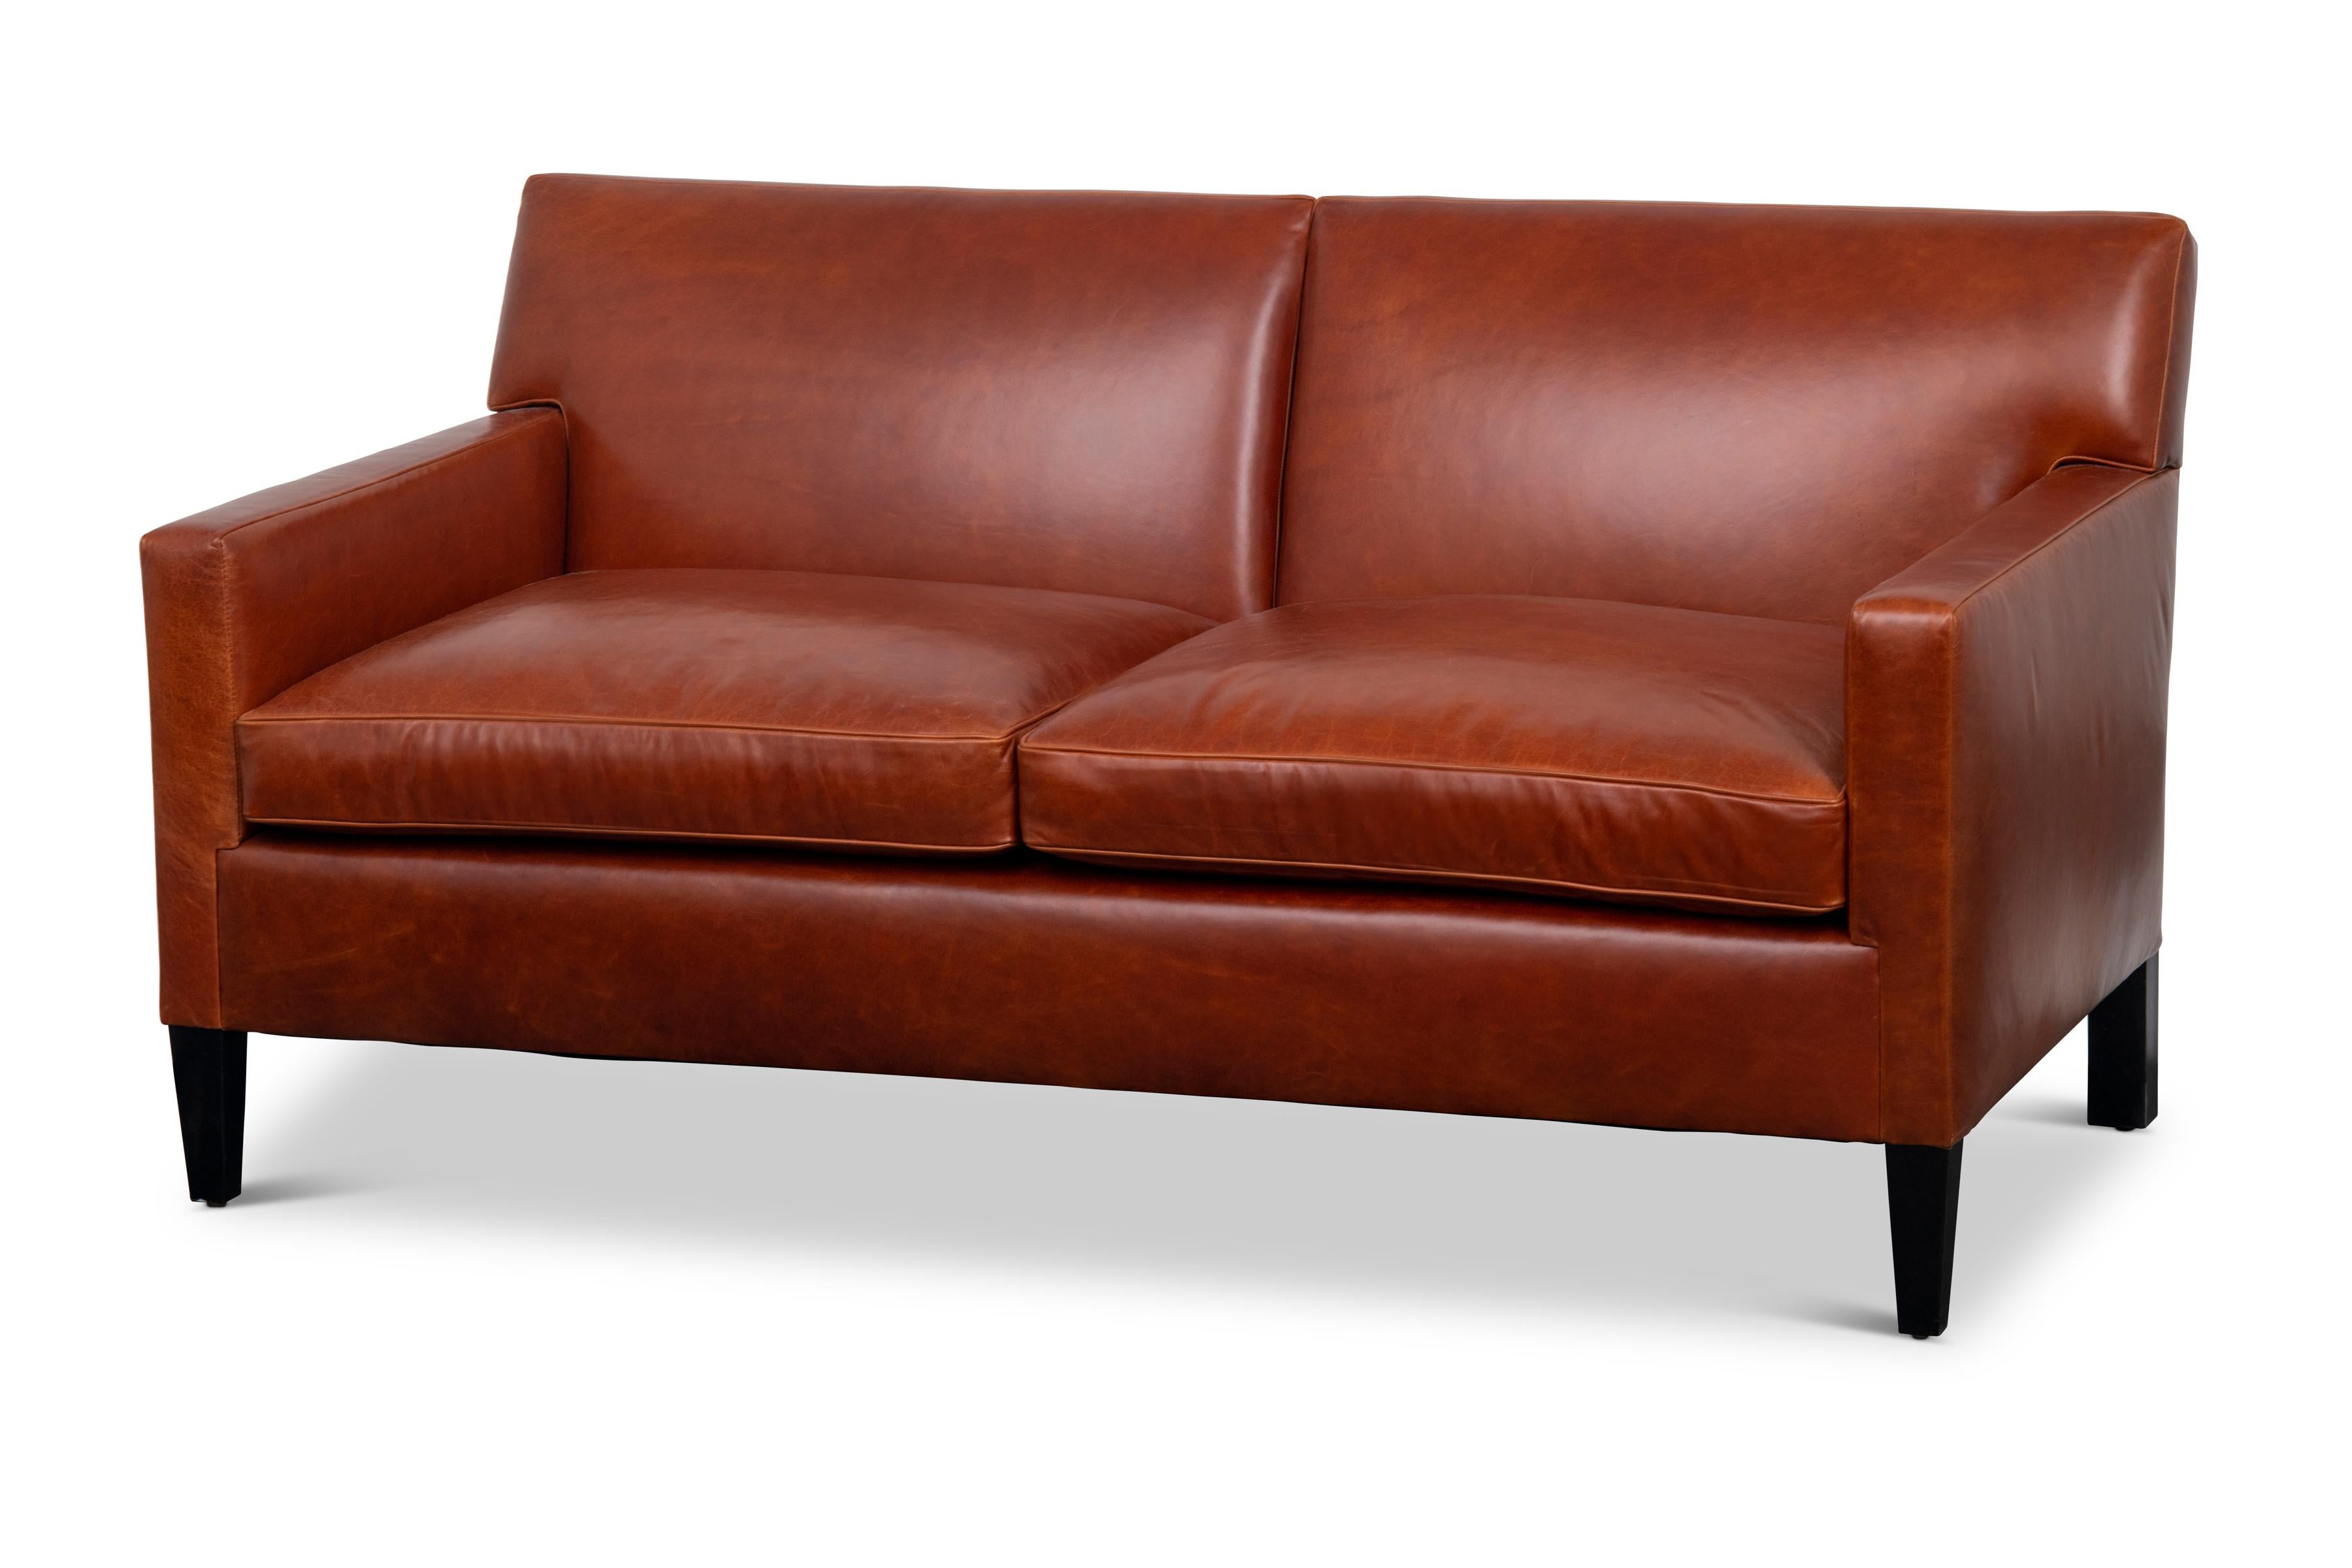 The Union sofa has a tight upholstered back with two loose seat cushions. Tapered front legs and squared back legs are made of blackened hardwood.

The Union sofa is a made to order item and hand crafted in the USA. 
Customer's own material is